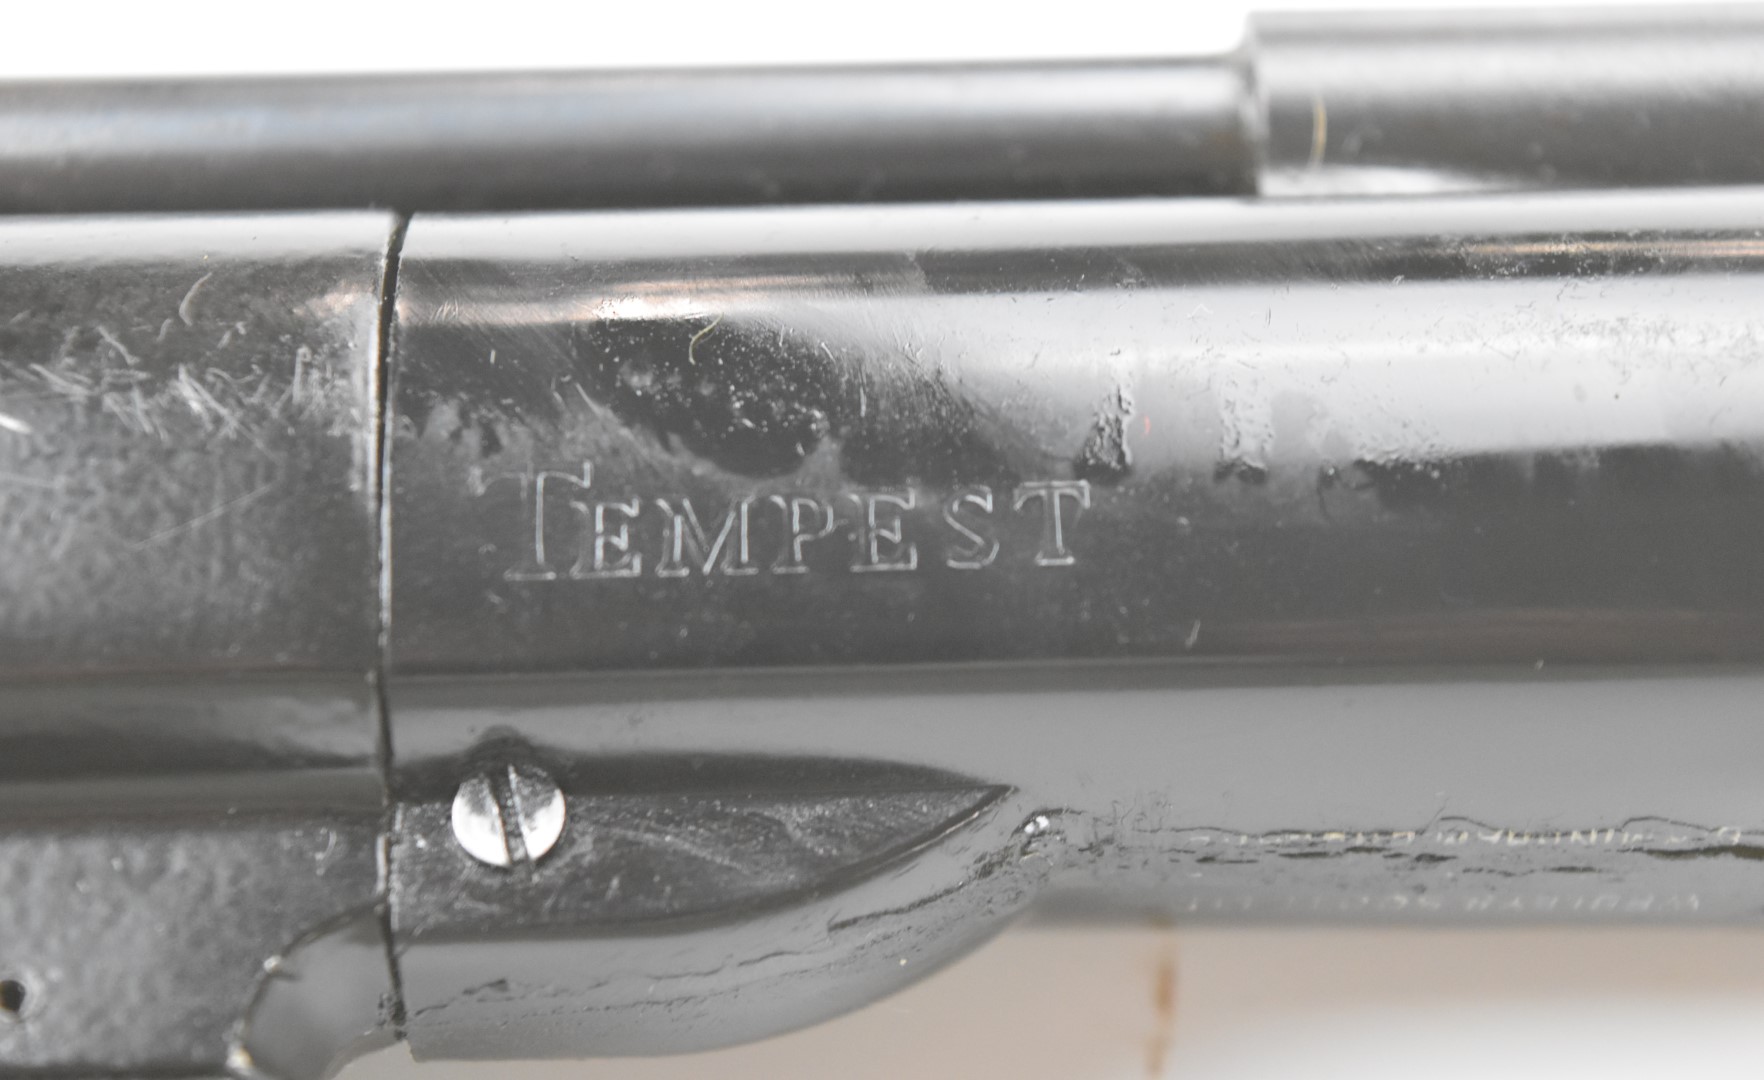 Webley Tempest .22 target air pistol with shaped and chequered grip and adjustable sights, NVSN, - Image 8 of 10